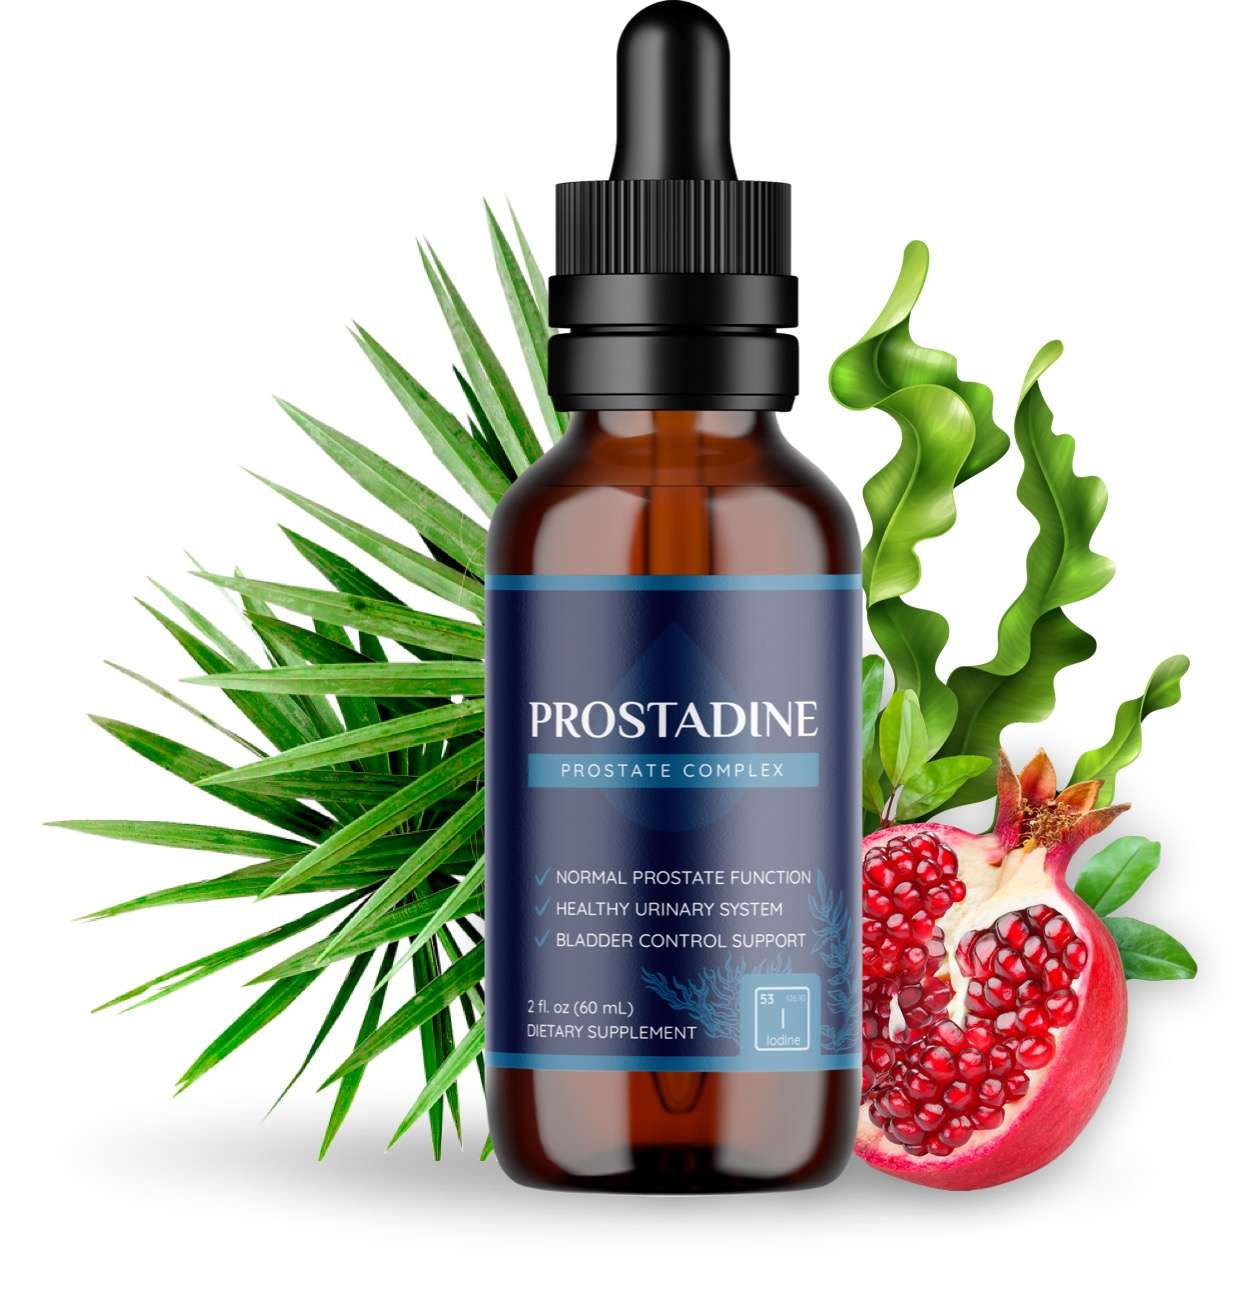 Customer Opinions About Prostadine